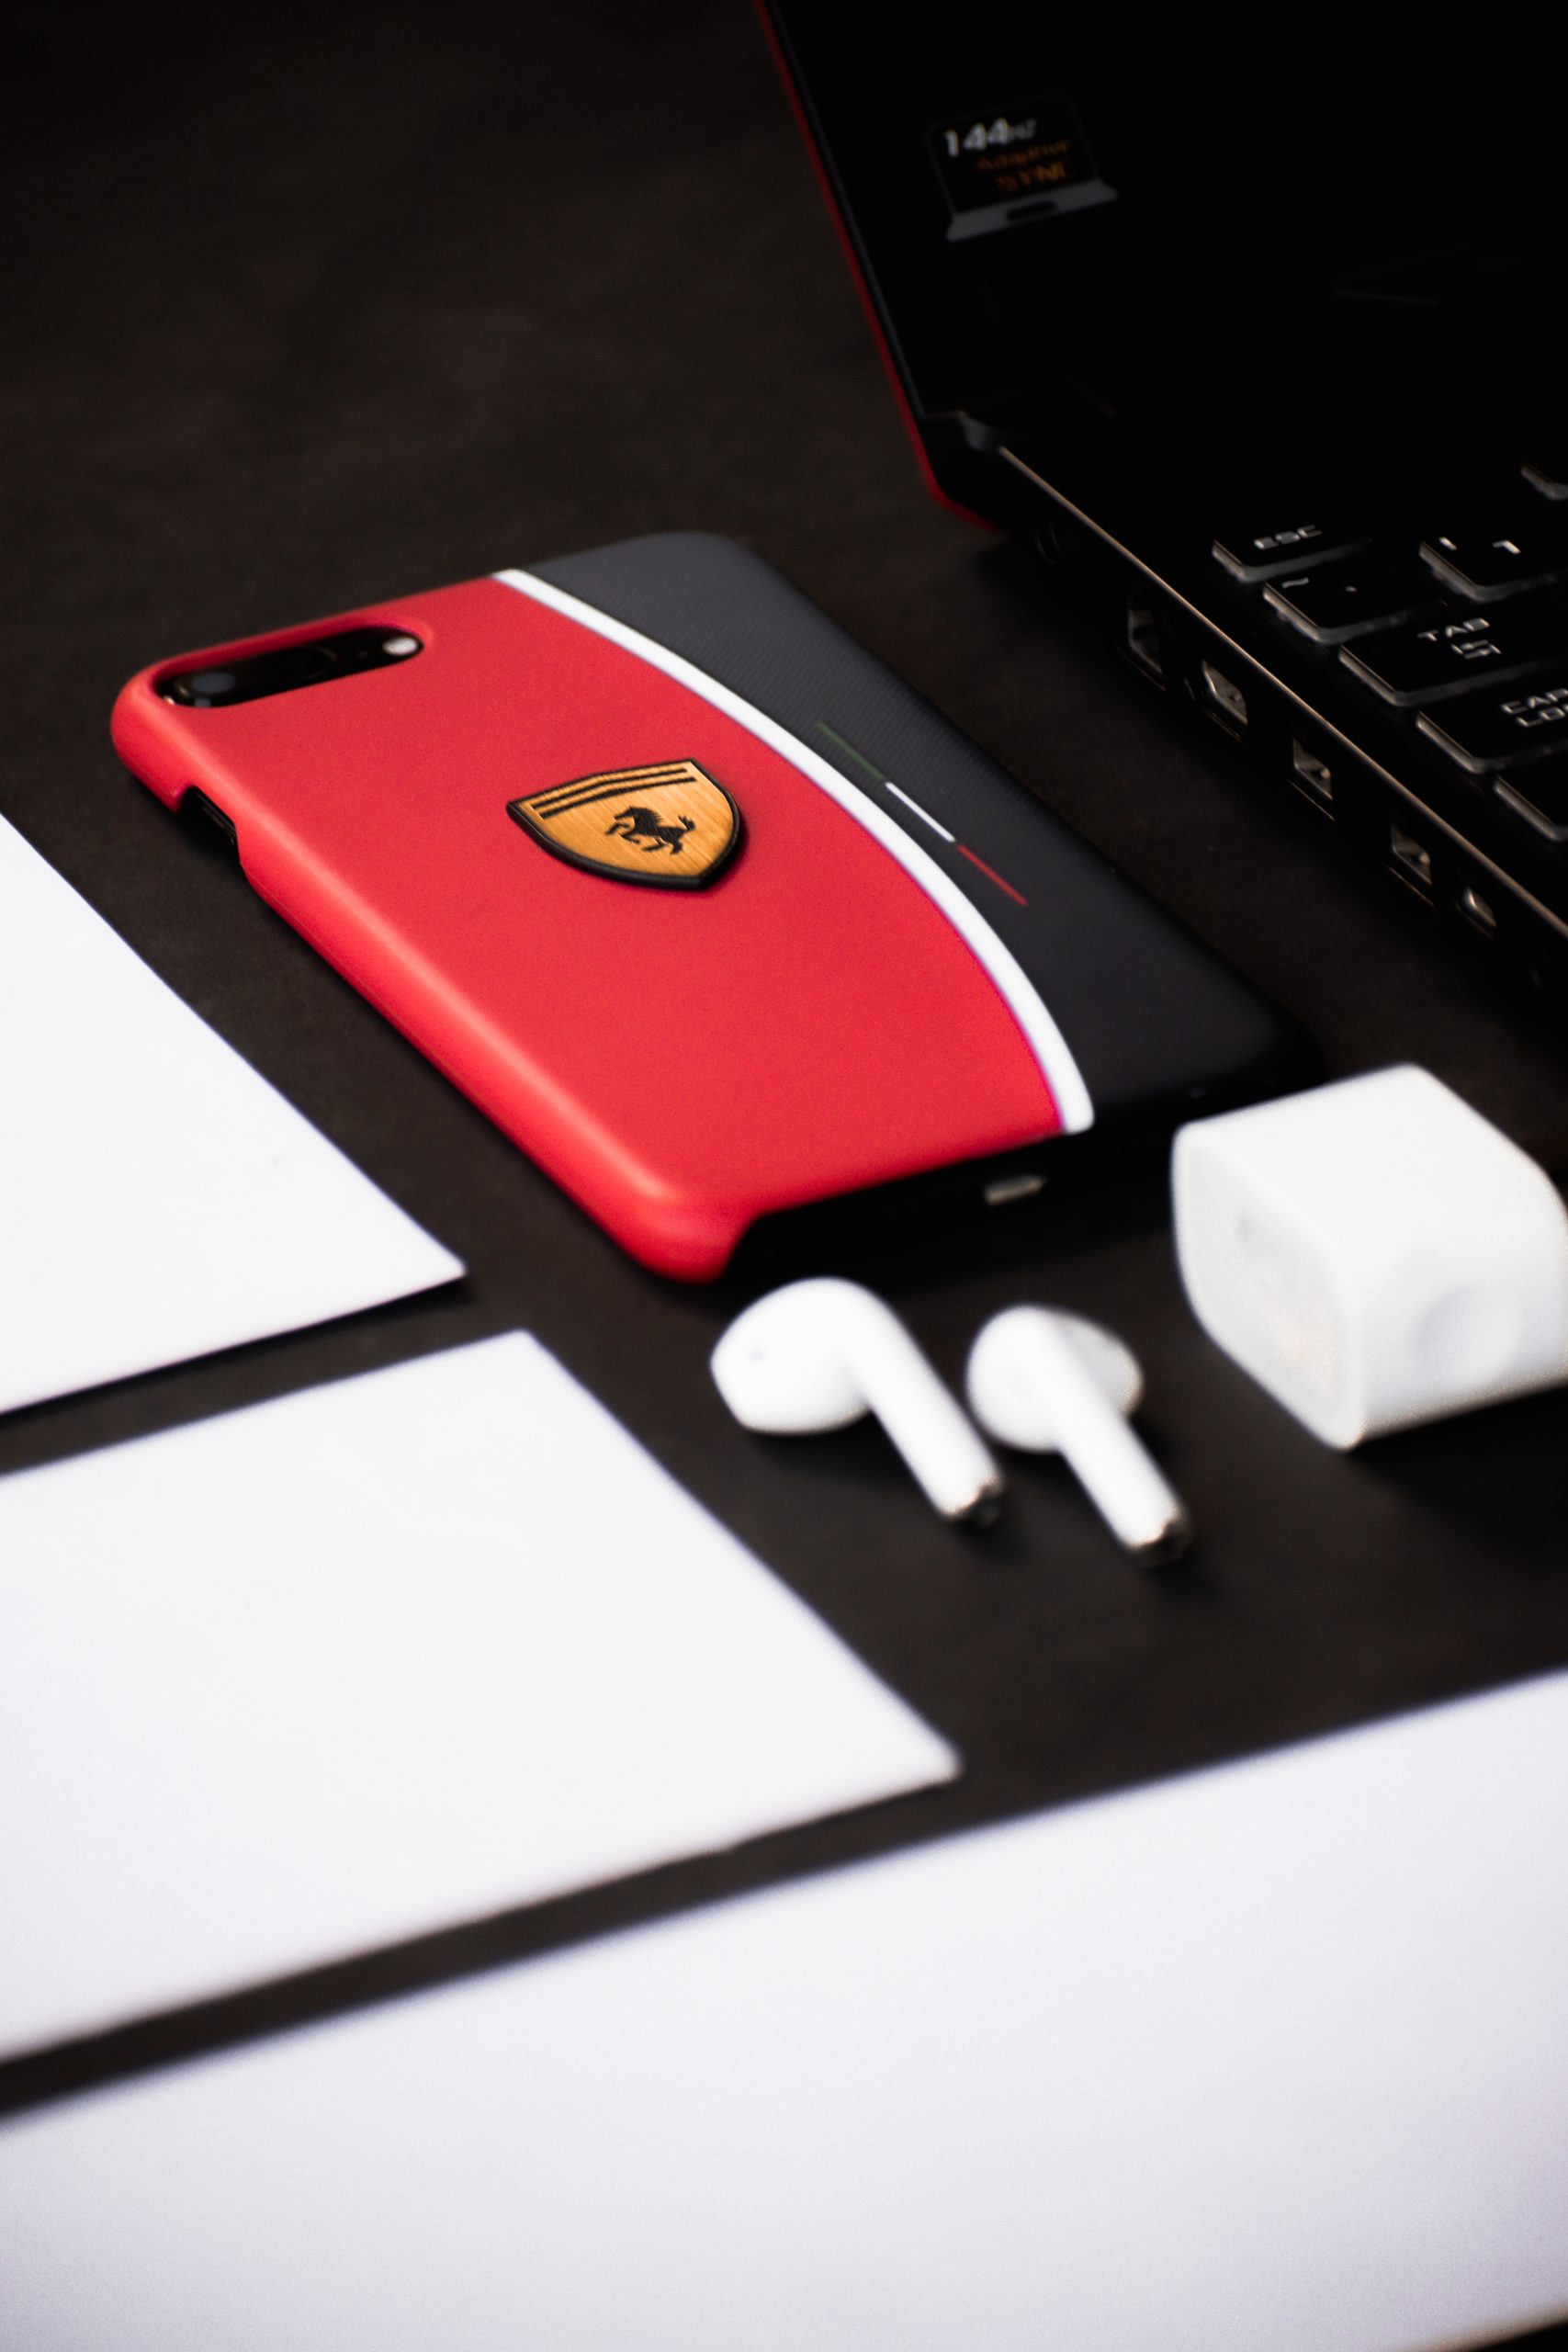 A phone cover and bluetooth earphones